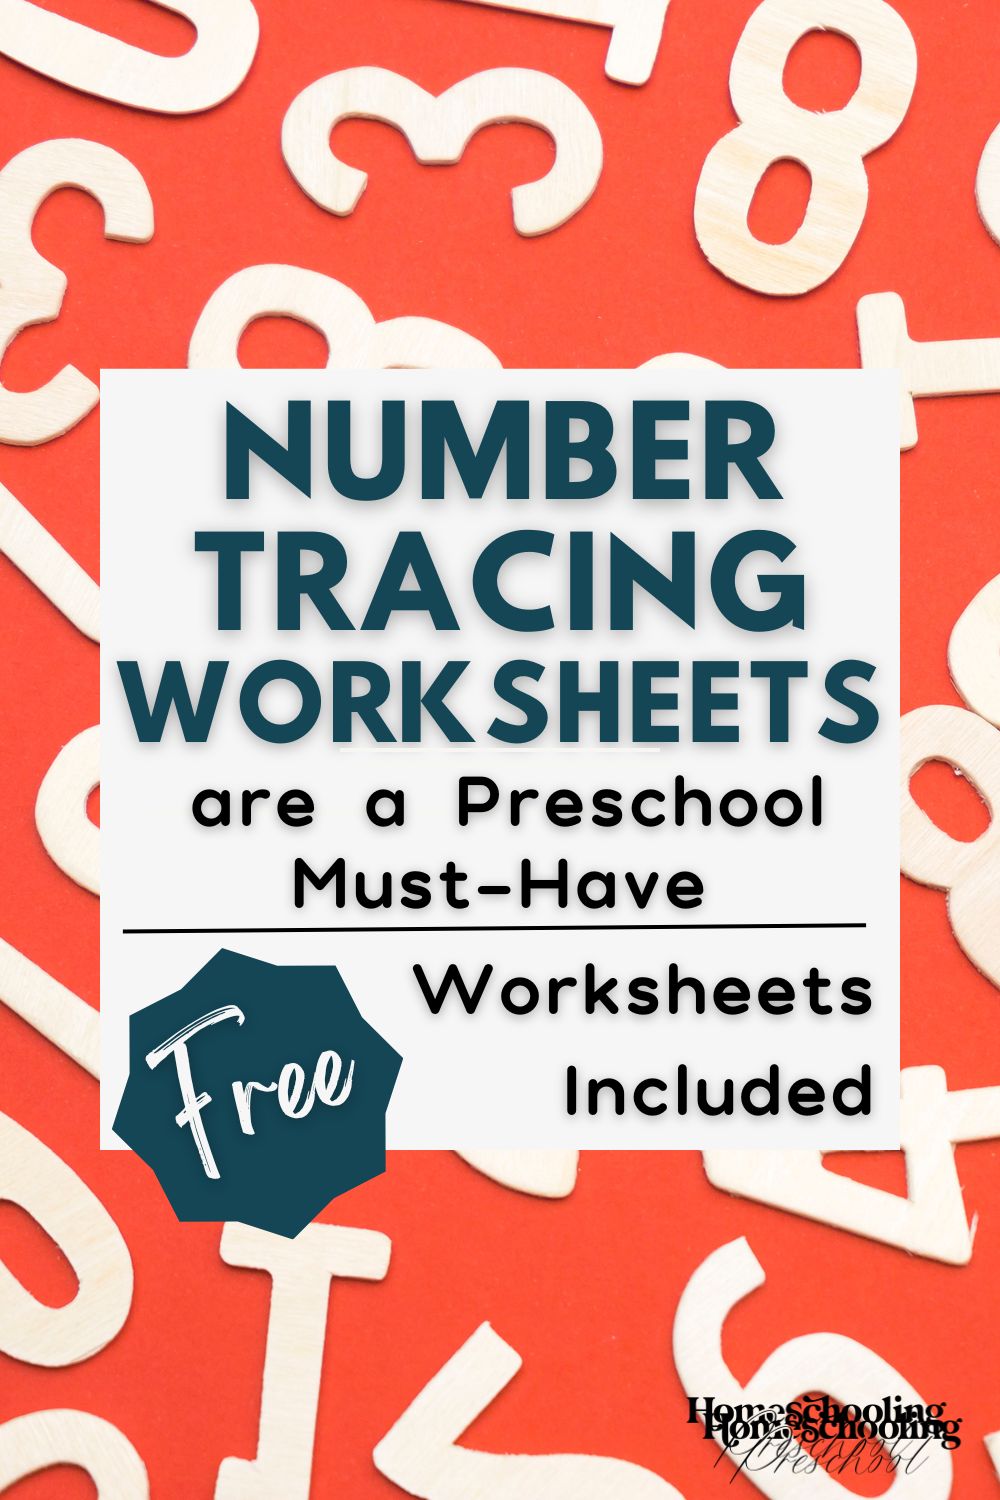 Number Tracing Worksheets are a Preschool Must-Have {Free Worksheets Included}